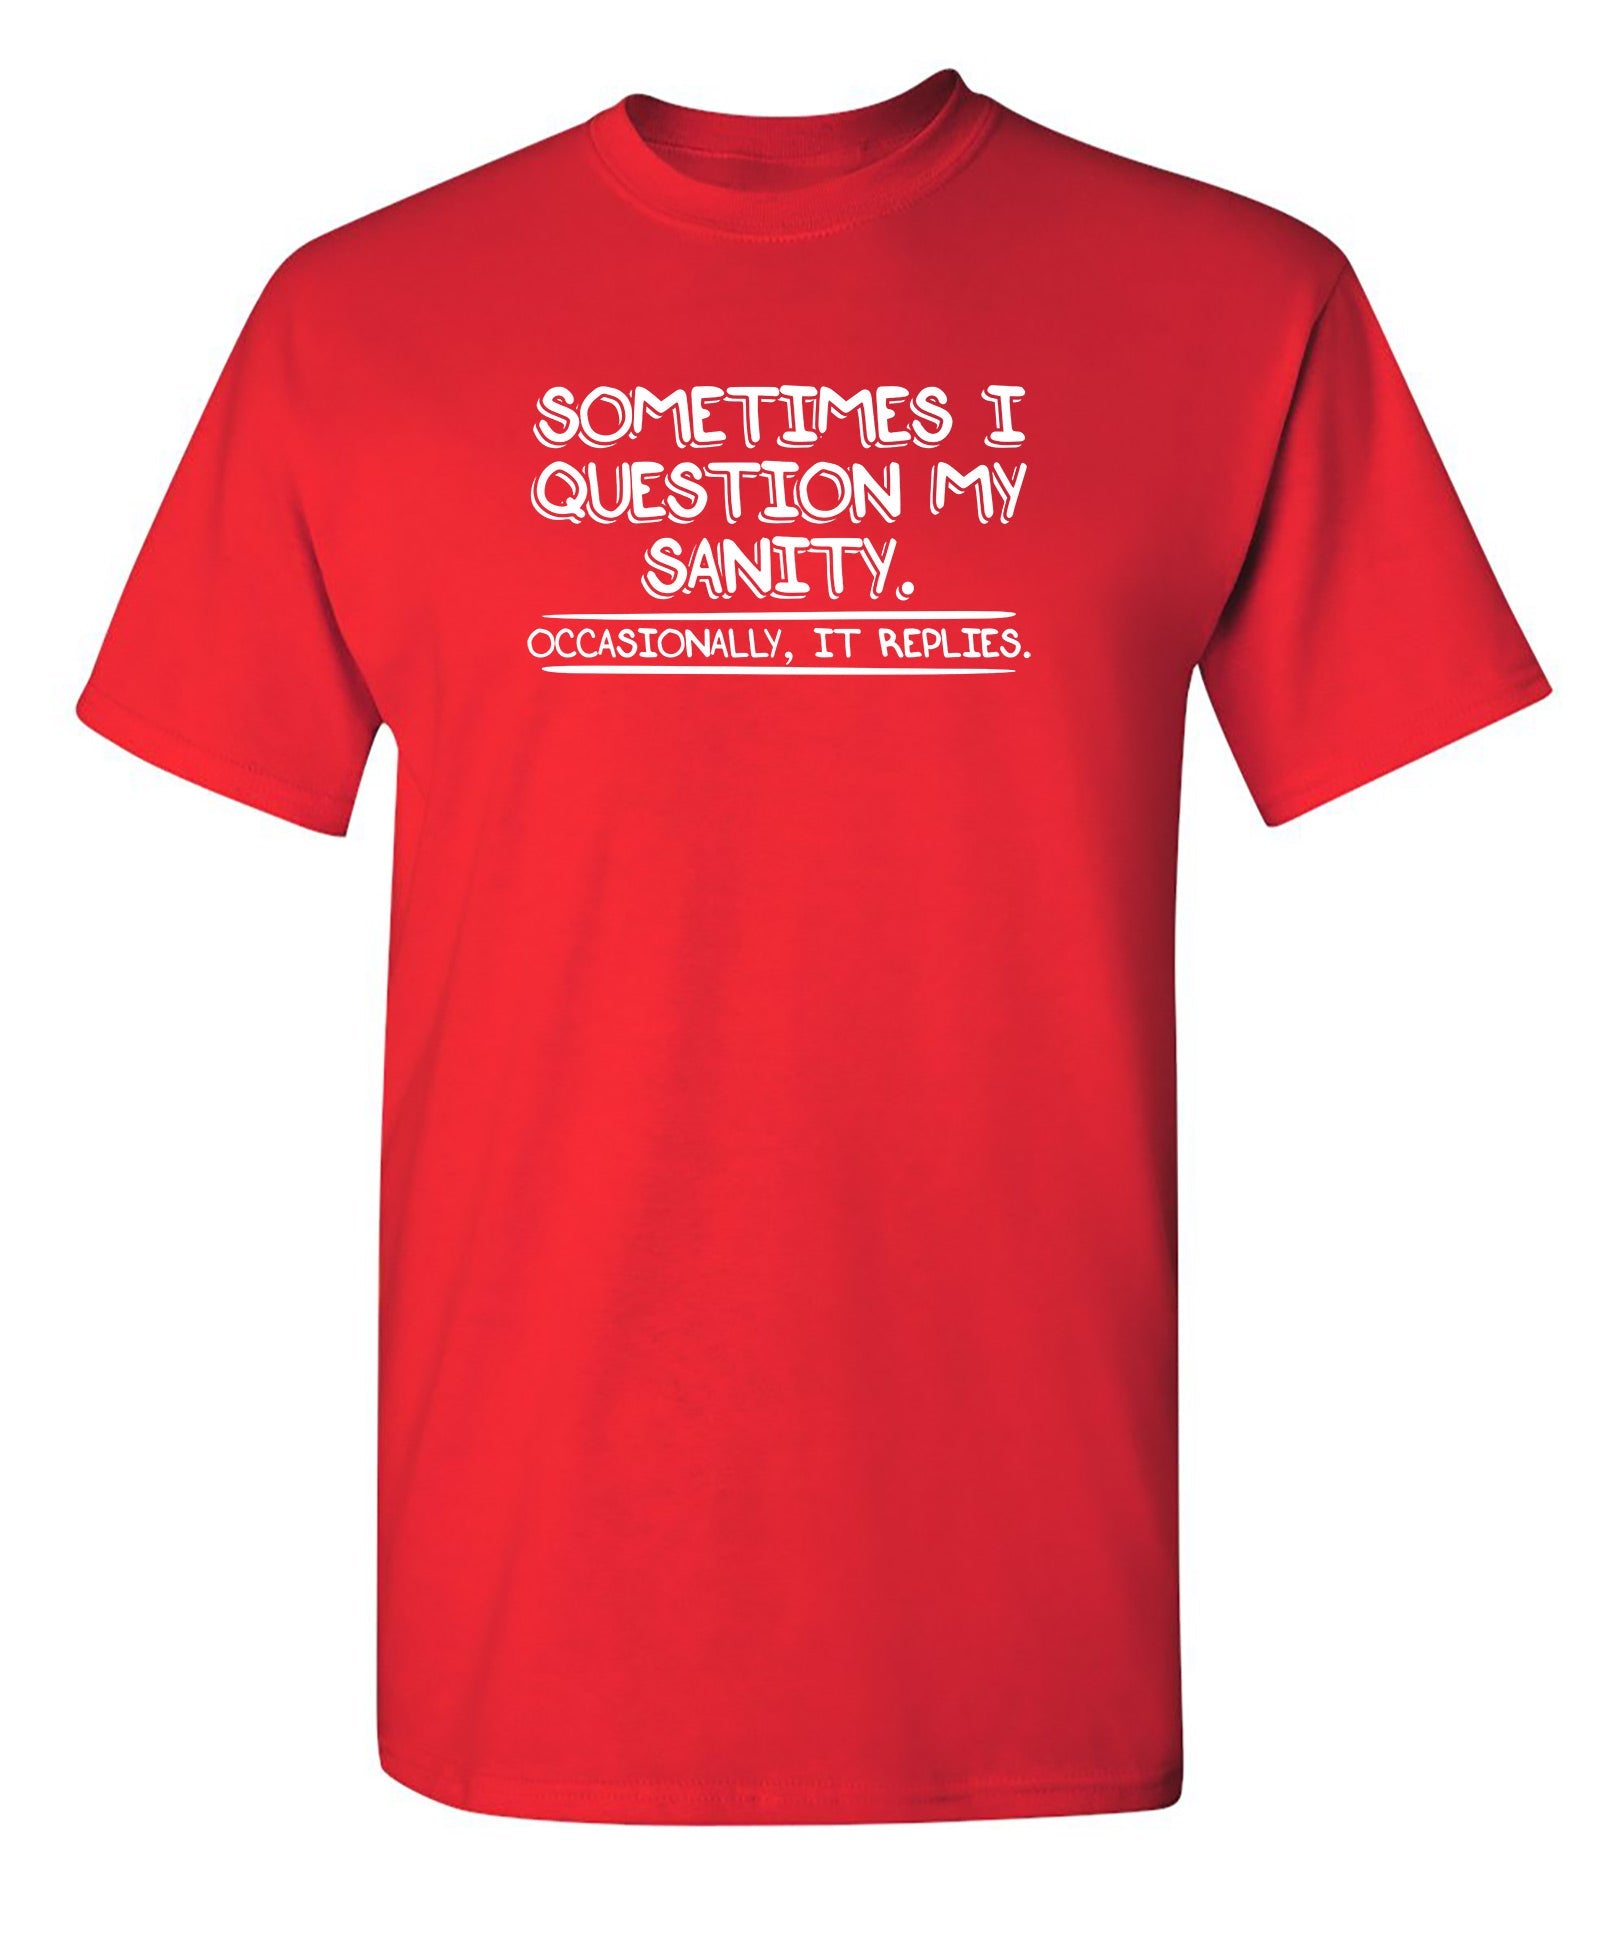 Sometimes I Question My Sanity. Occasionally It Replies. - Funny T Shirts & Graphic Tees